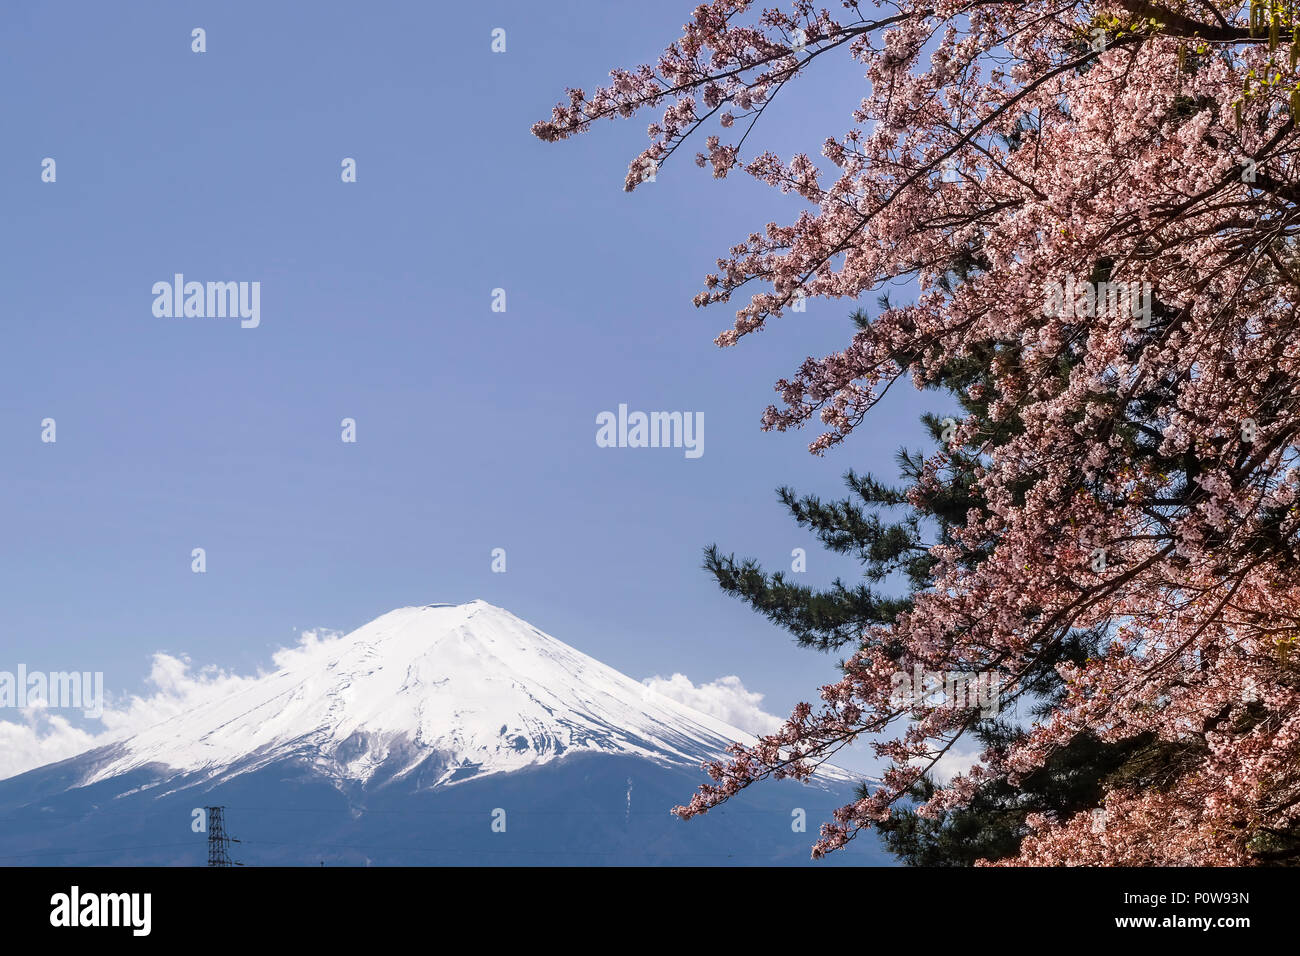 Flowering tree with Mount Fuji in the background, on a beautiful sunny day, Japan Stock Photo